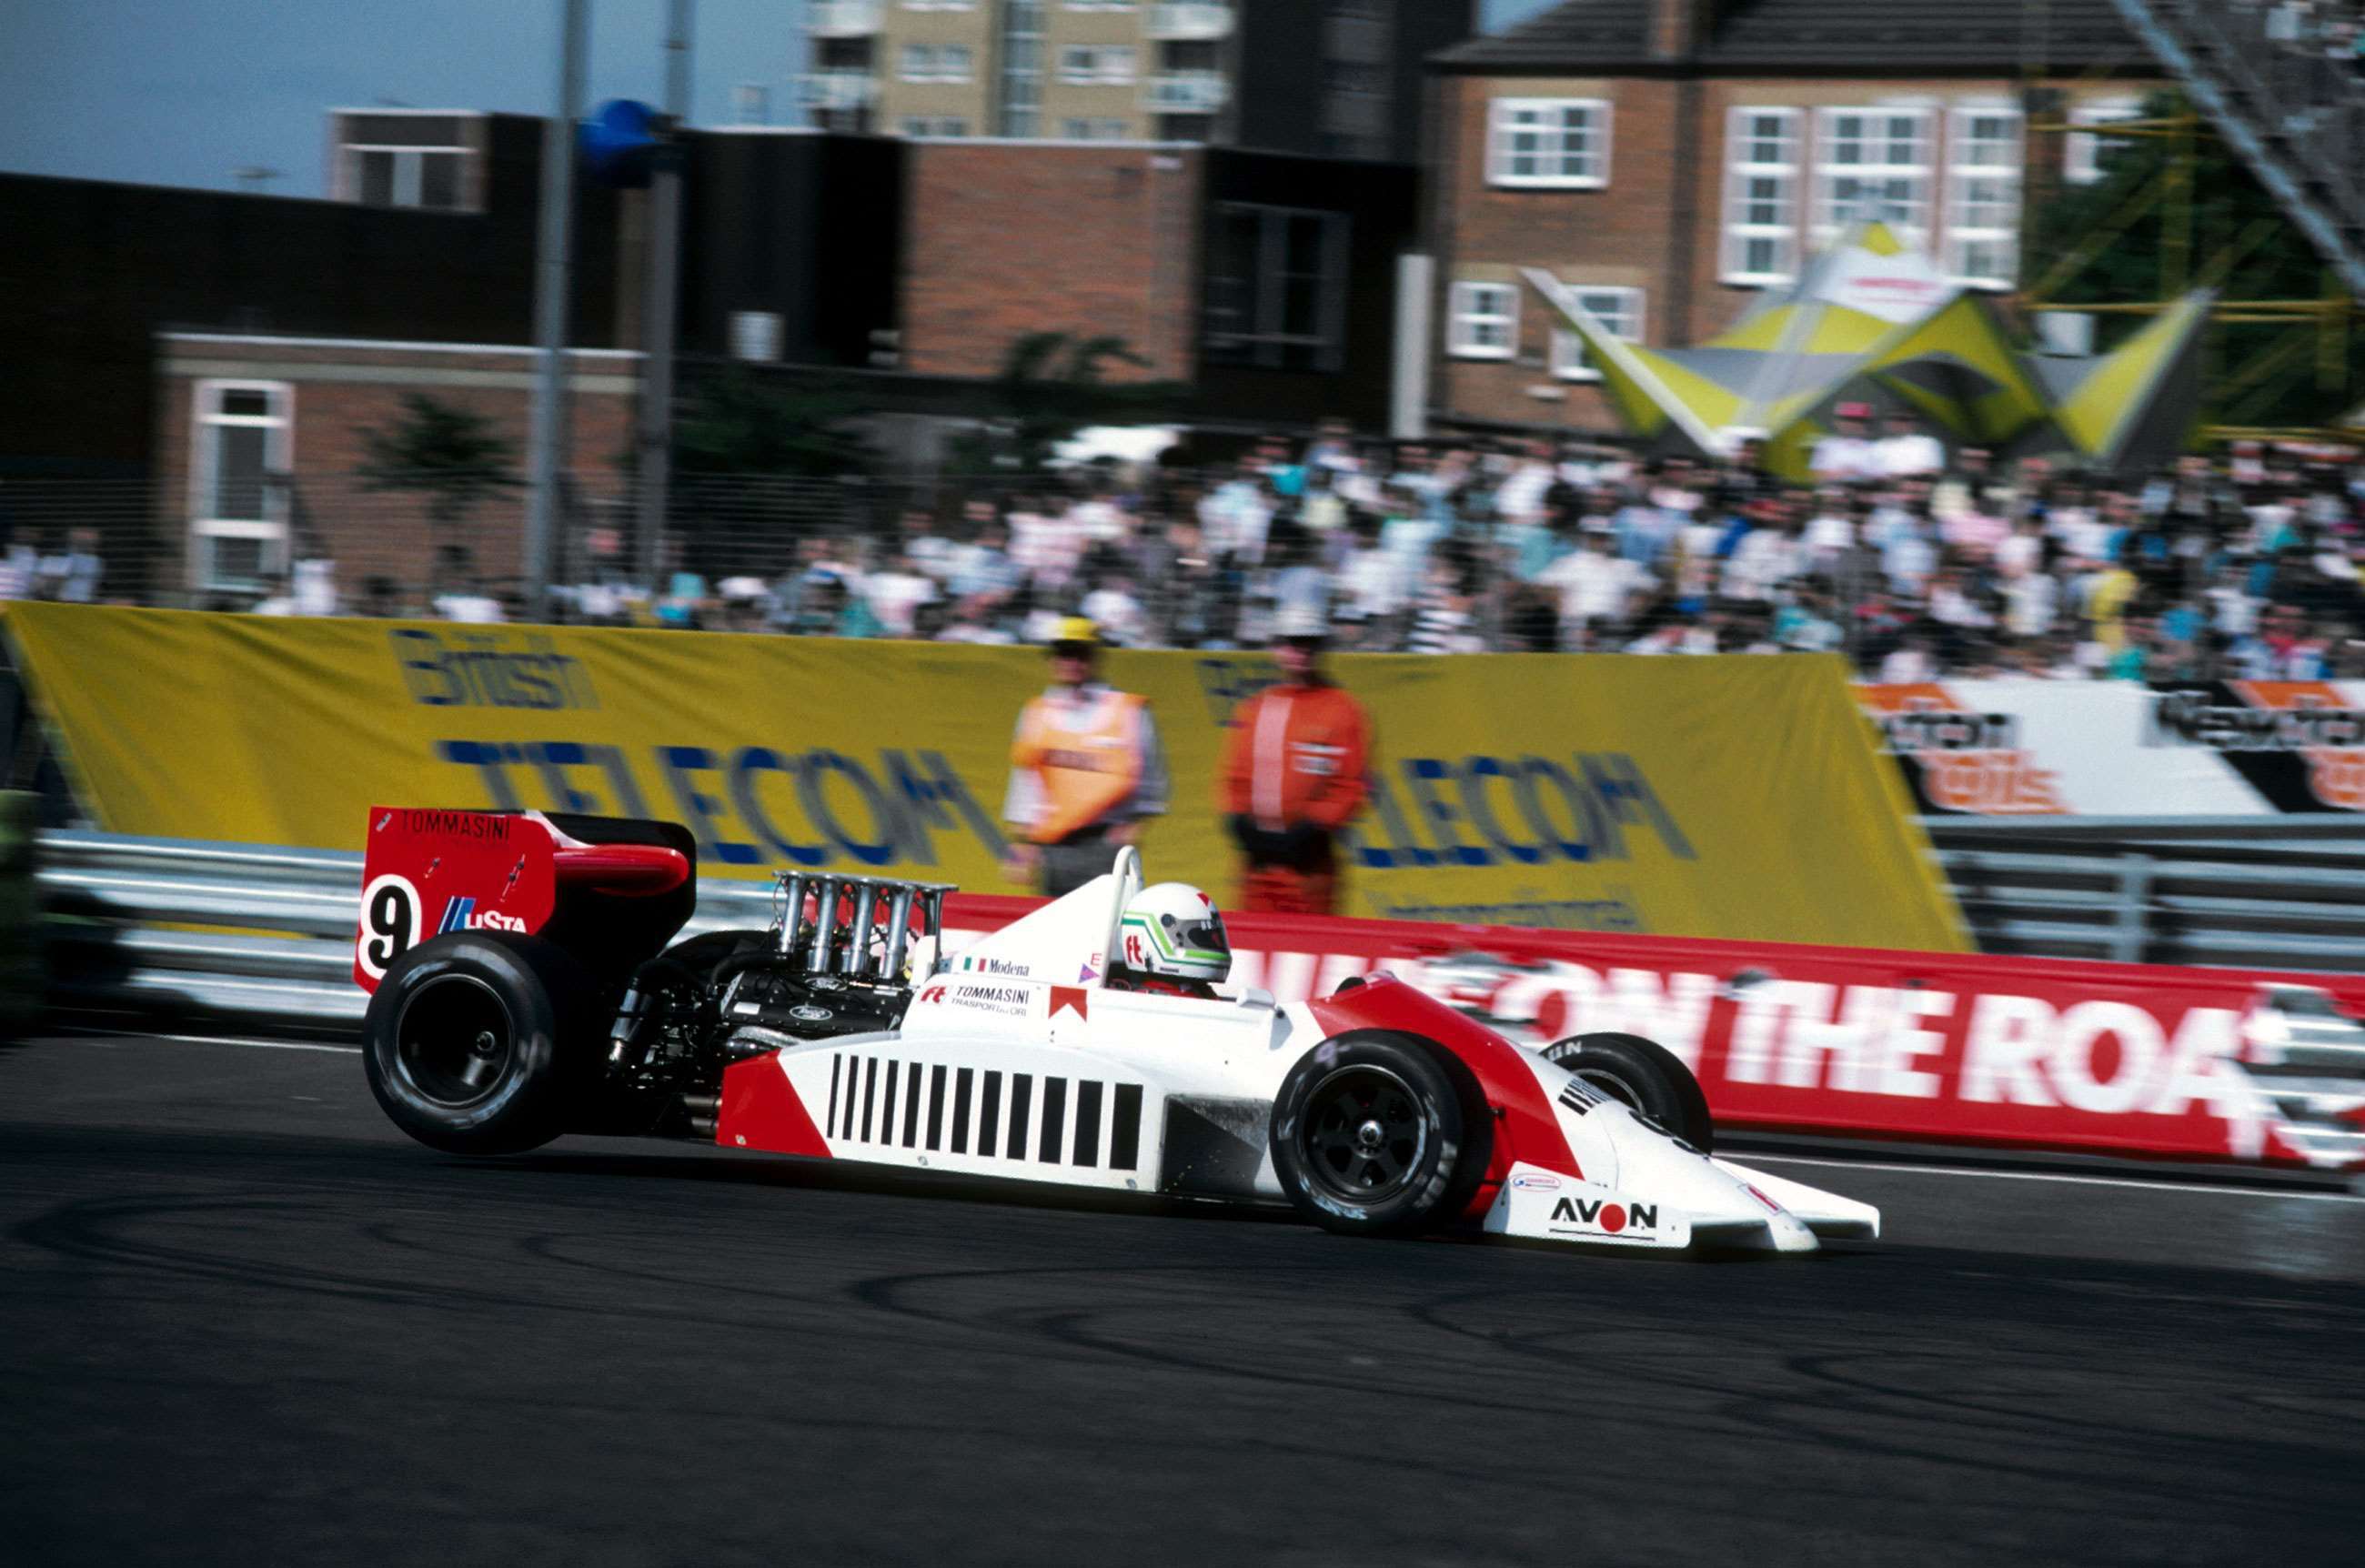 Modena on his way to winning the 1987 F3000 Birmingham Superprix in his Onyx March 87B.